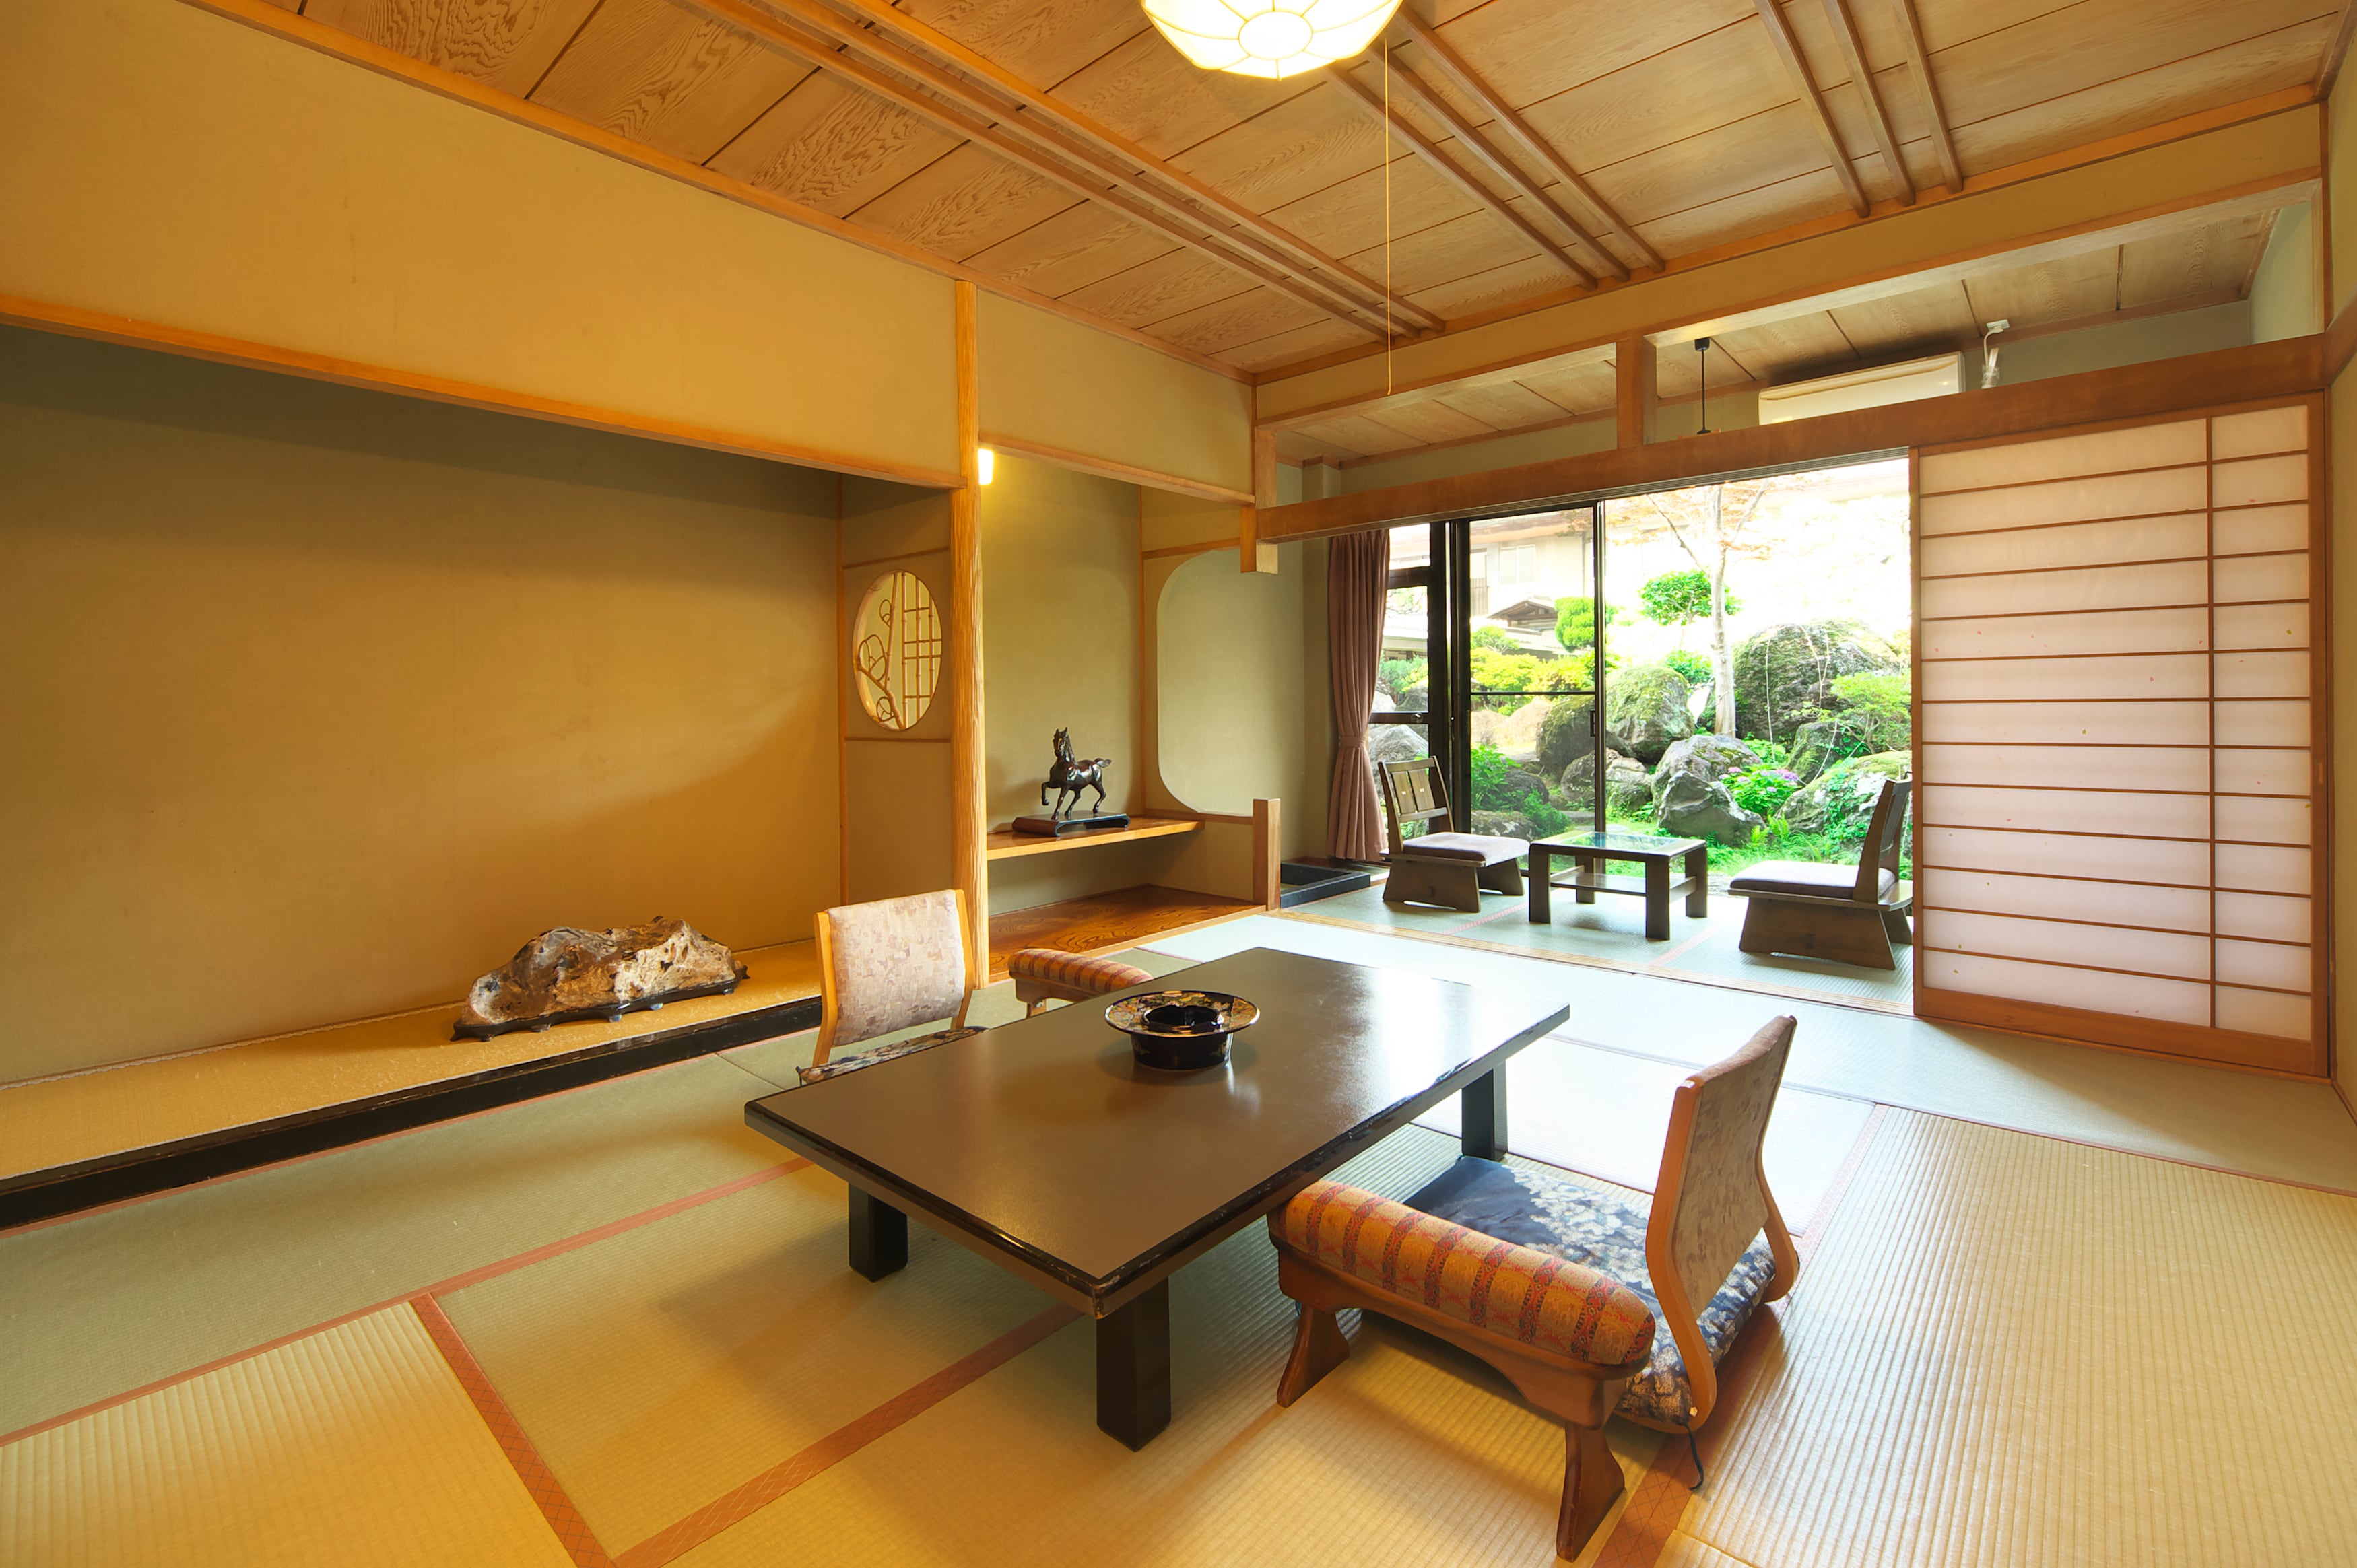 This is a normal type guest room (10 tatami mats in Honma).